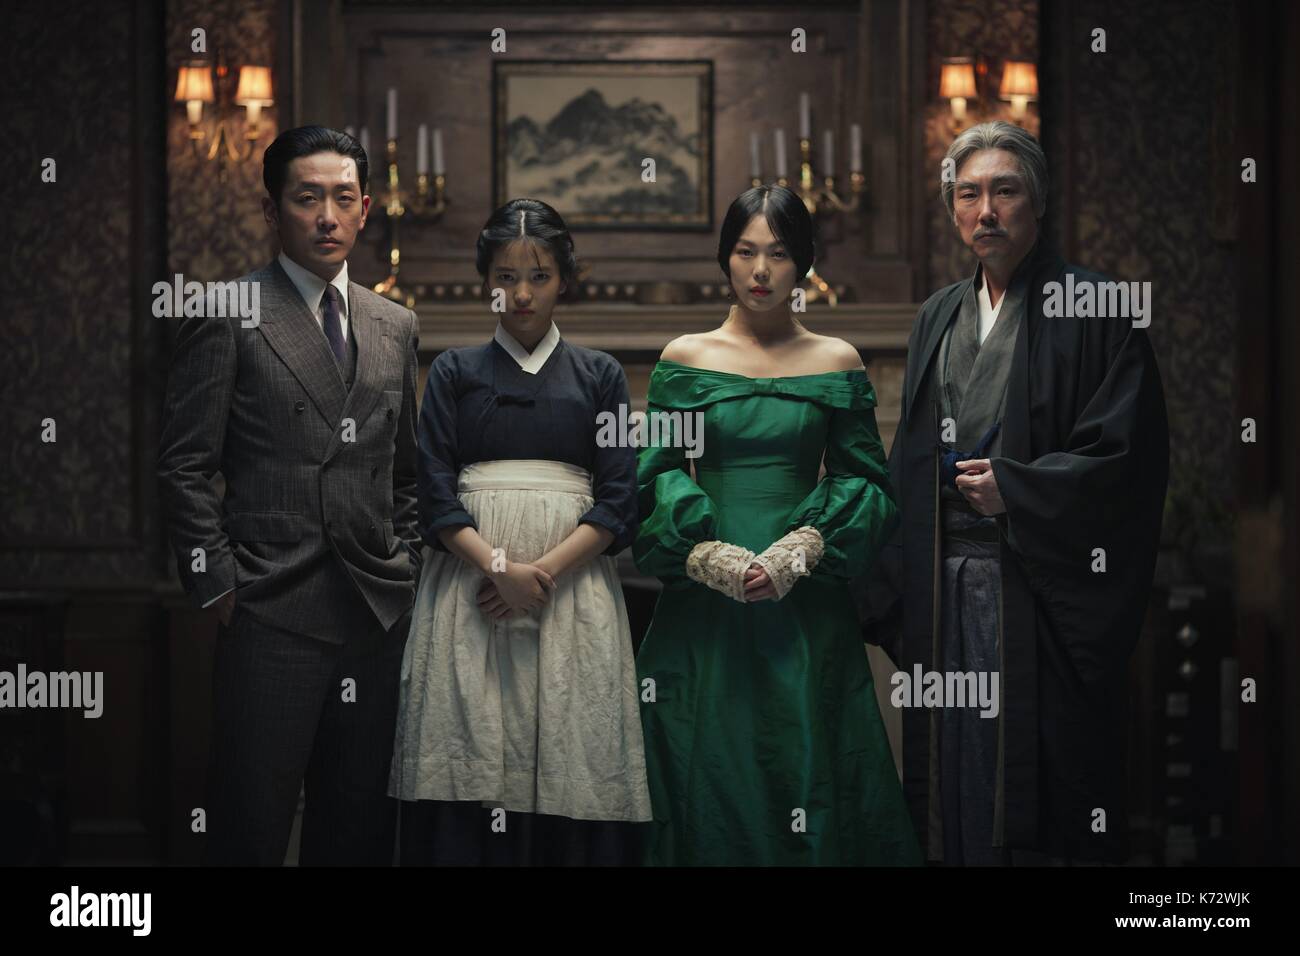 The Handmaiden  Ah-ga-ssi  Year : 2016 South Korea  Director : Chan-wook Park  Jung-woo Ha, Kim Tae-ri, Min-hee Kim, Jin-woong Jo     Photo: Jae-Hyeok Lee.  It is forbidden to reproduce the photograph out of context of the promotion of the film. It must be credited to the Film Company and/or the photographer assigned by or authorized by/allowed on the set by the Film Company. Restricted to Editorial Use. Photo12 does not grant publicity rights of the persons represented. Stock Photo